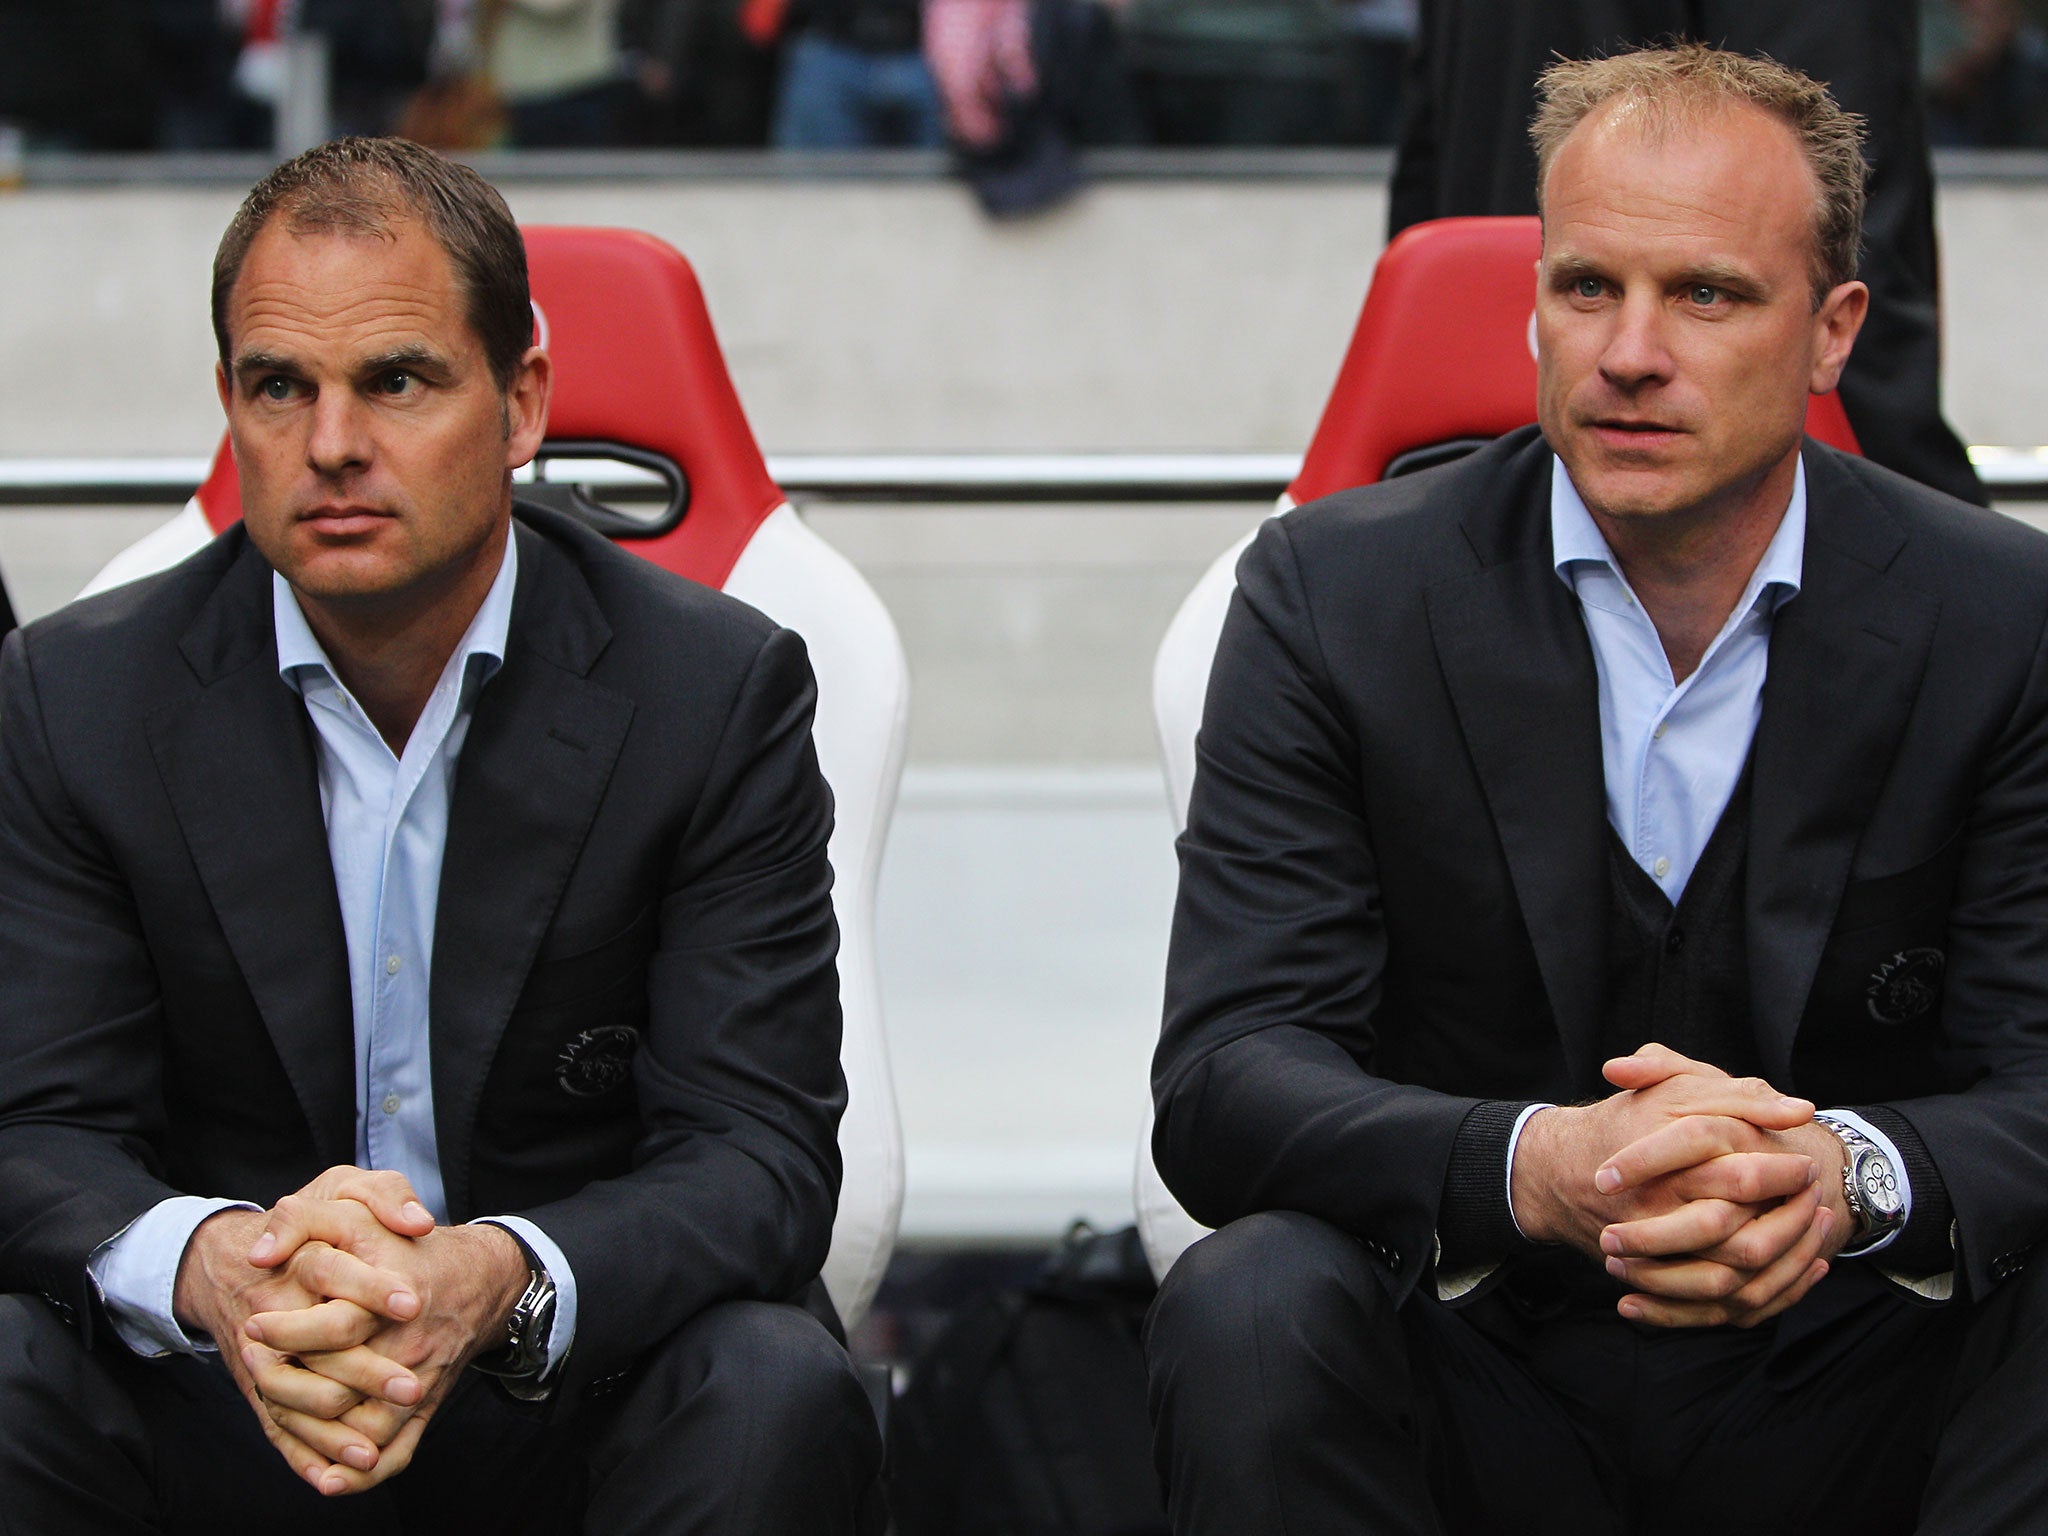 Dennis Bergkamp, right, says Van Gaal works well with young players, like when they were both at Ajax, but his ‘fanatical approach’ does not go down as well with those who are more experienced